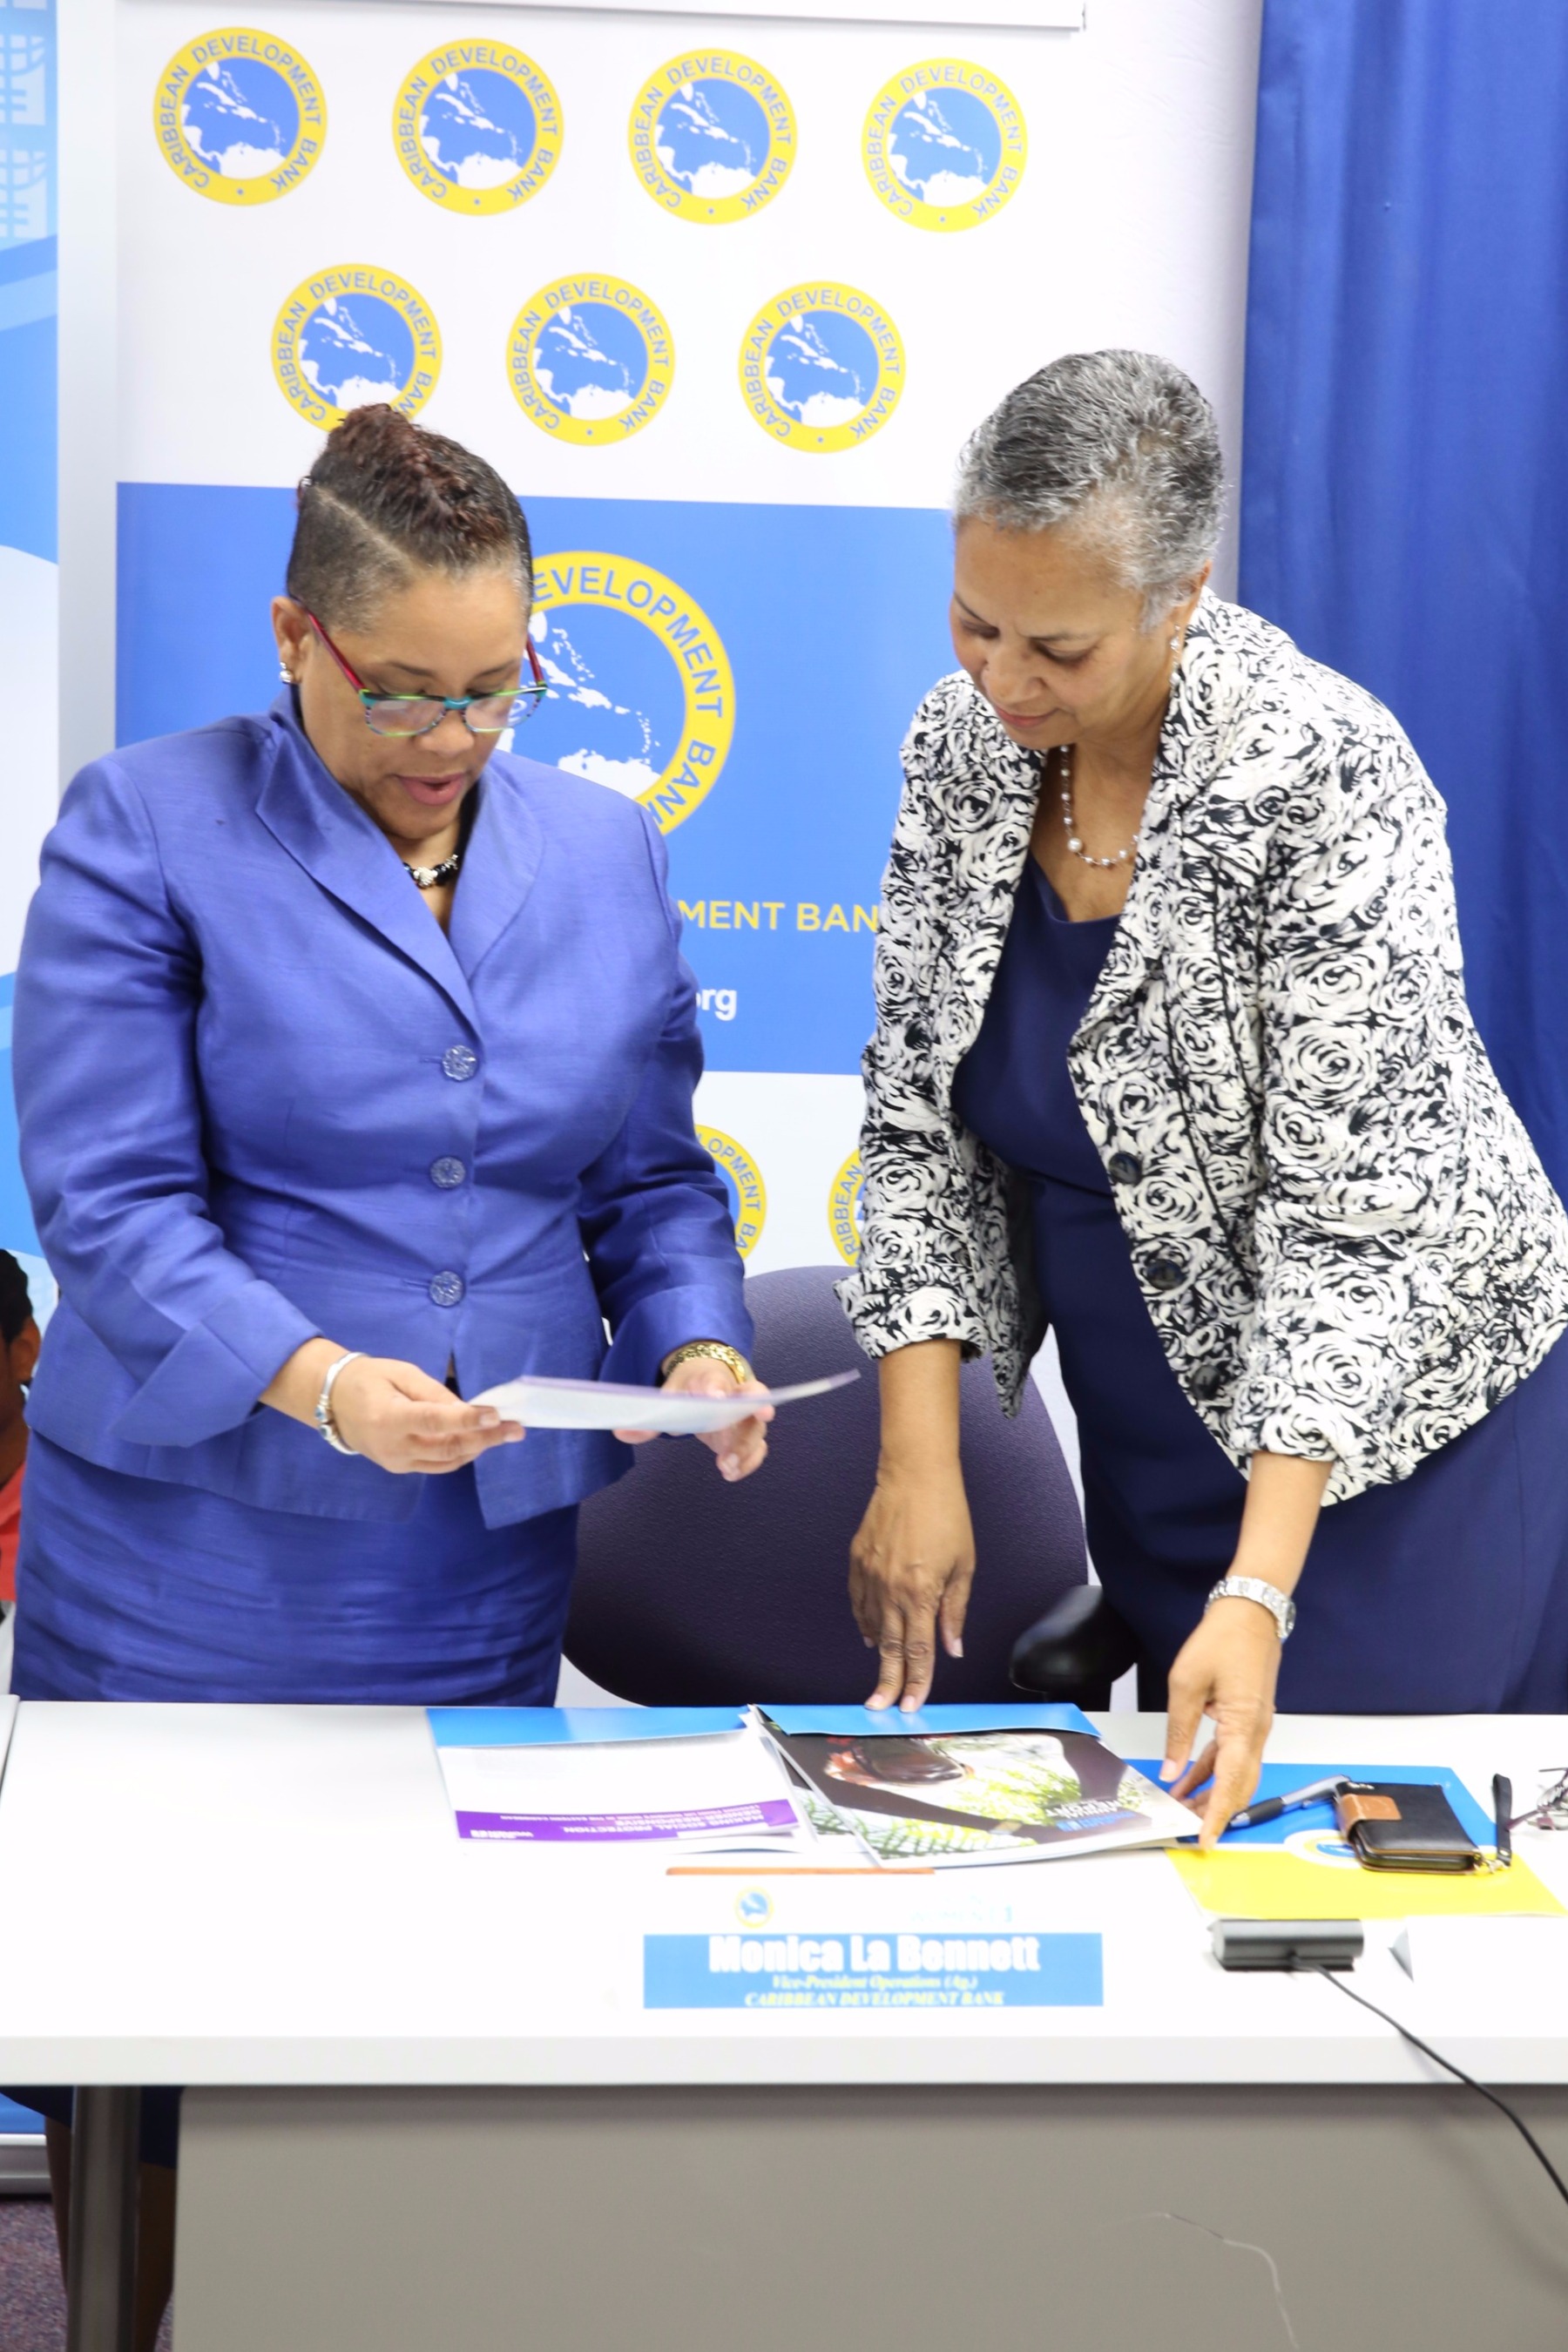 Ms. M. Alison McLean, Representative, UN Women Multi-Country Office – Caribbean and Monica La Bennett, Acting Vice-President (Operations), CDB, review the agreement on July 27, 2017.